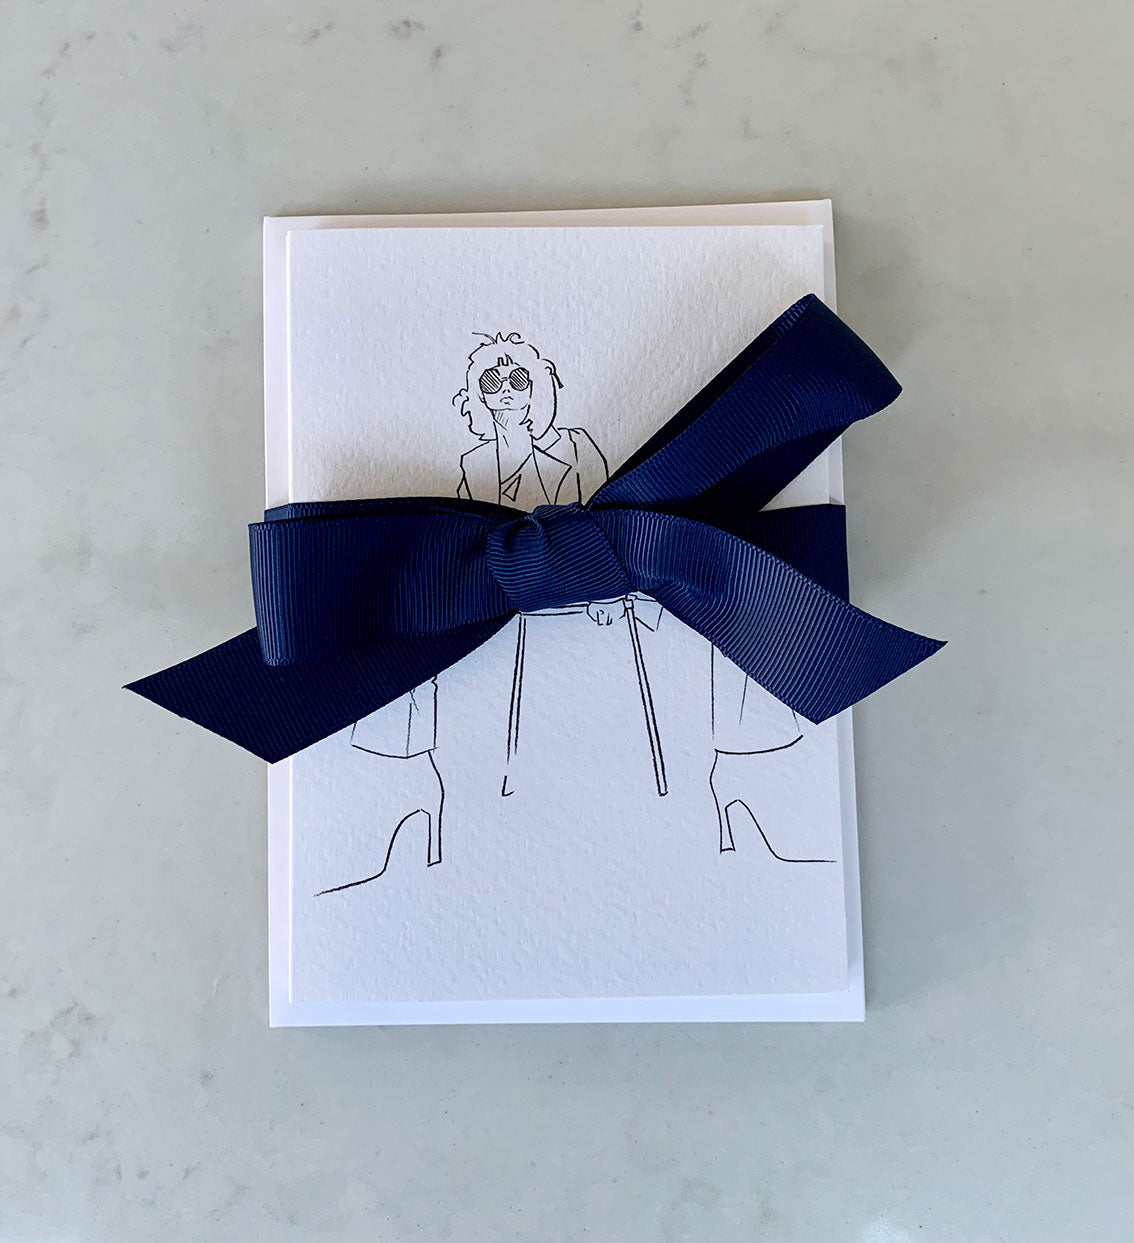 Set of 6 gift cards with fashion illustrations wrapped in a navy ribbon.